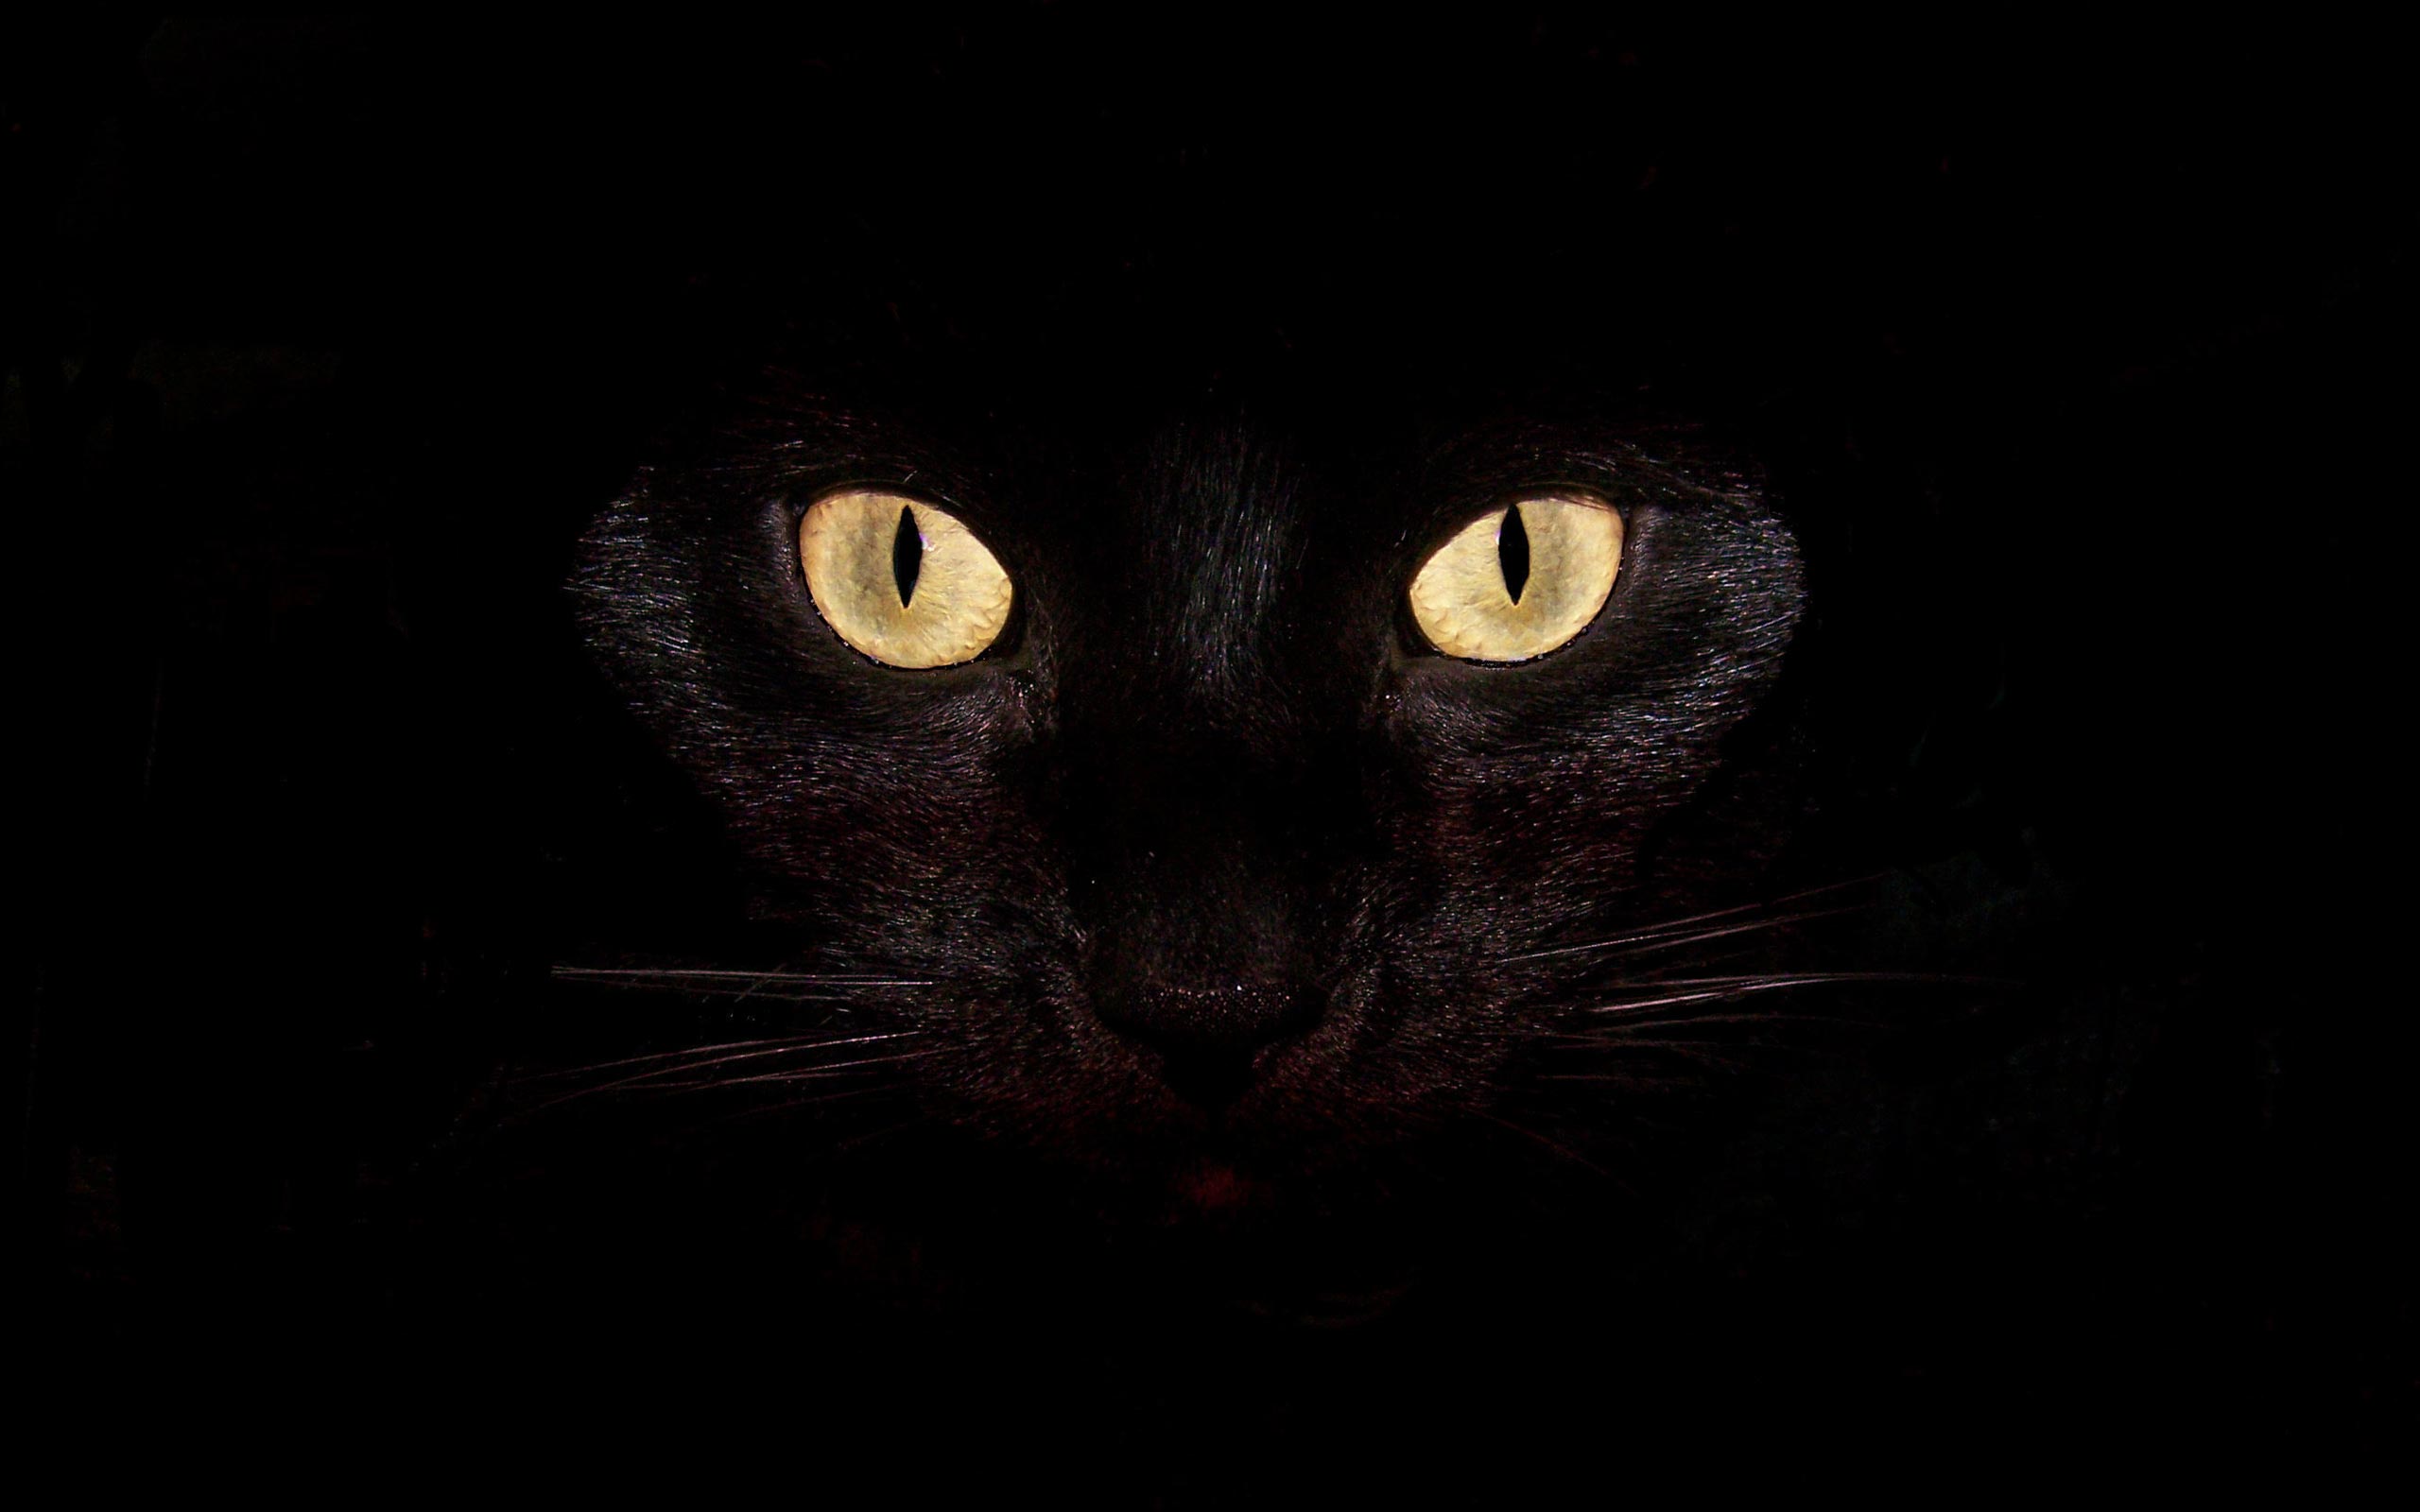 Abstract Black Cat Background Wallpaper In High Resolution For